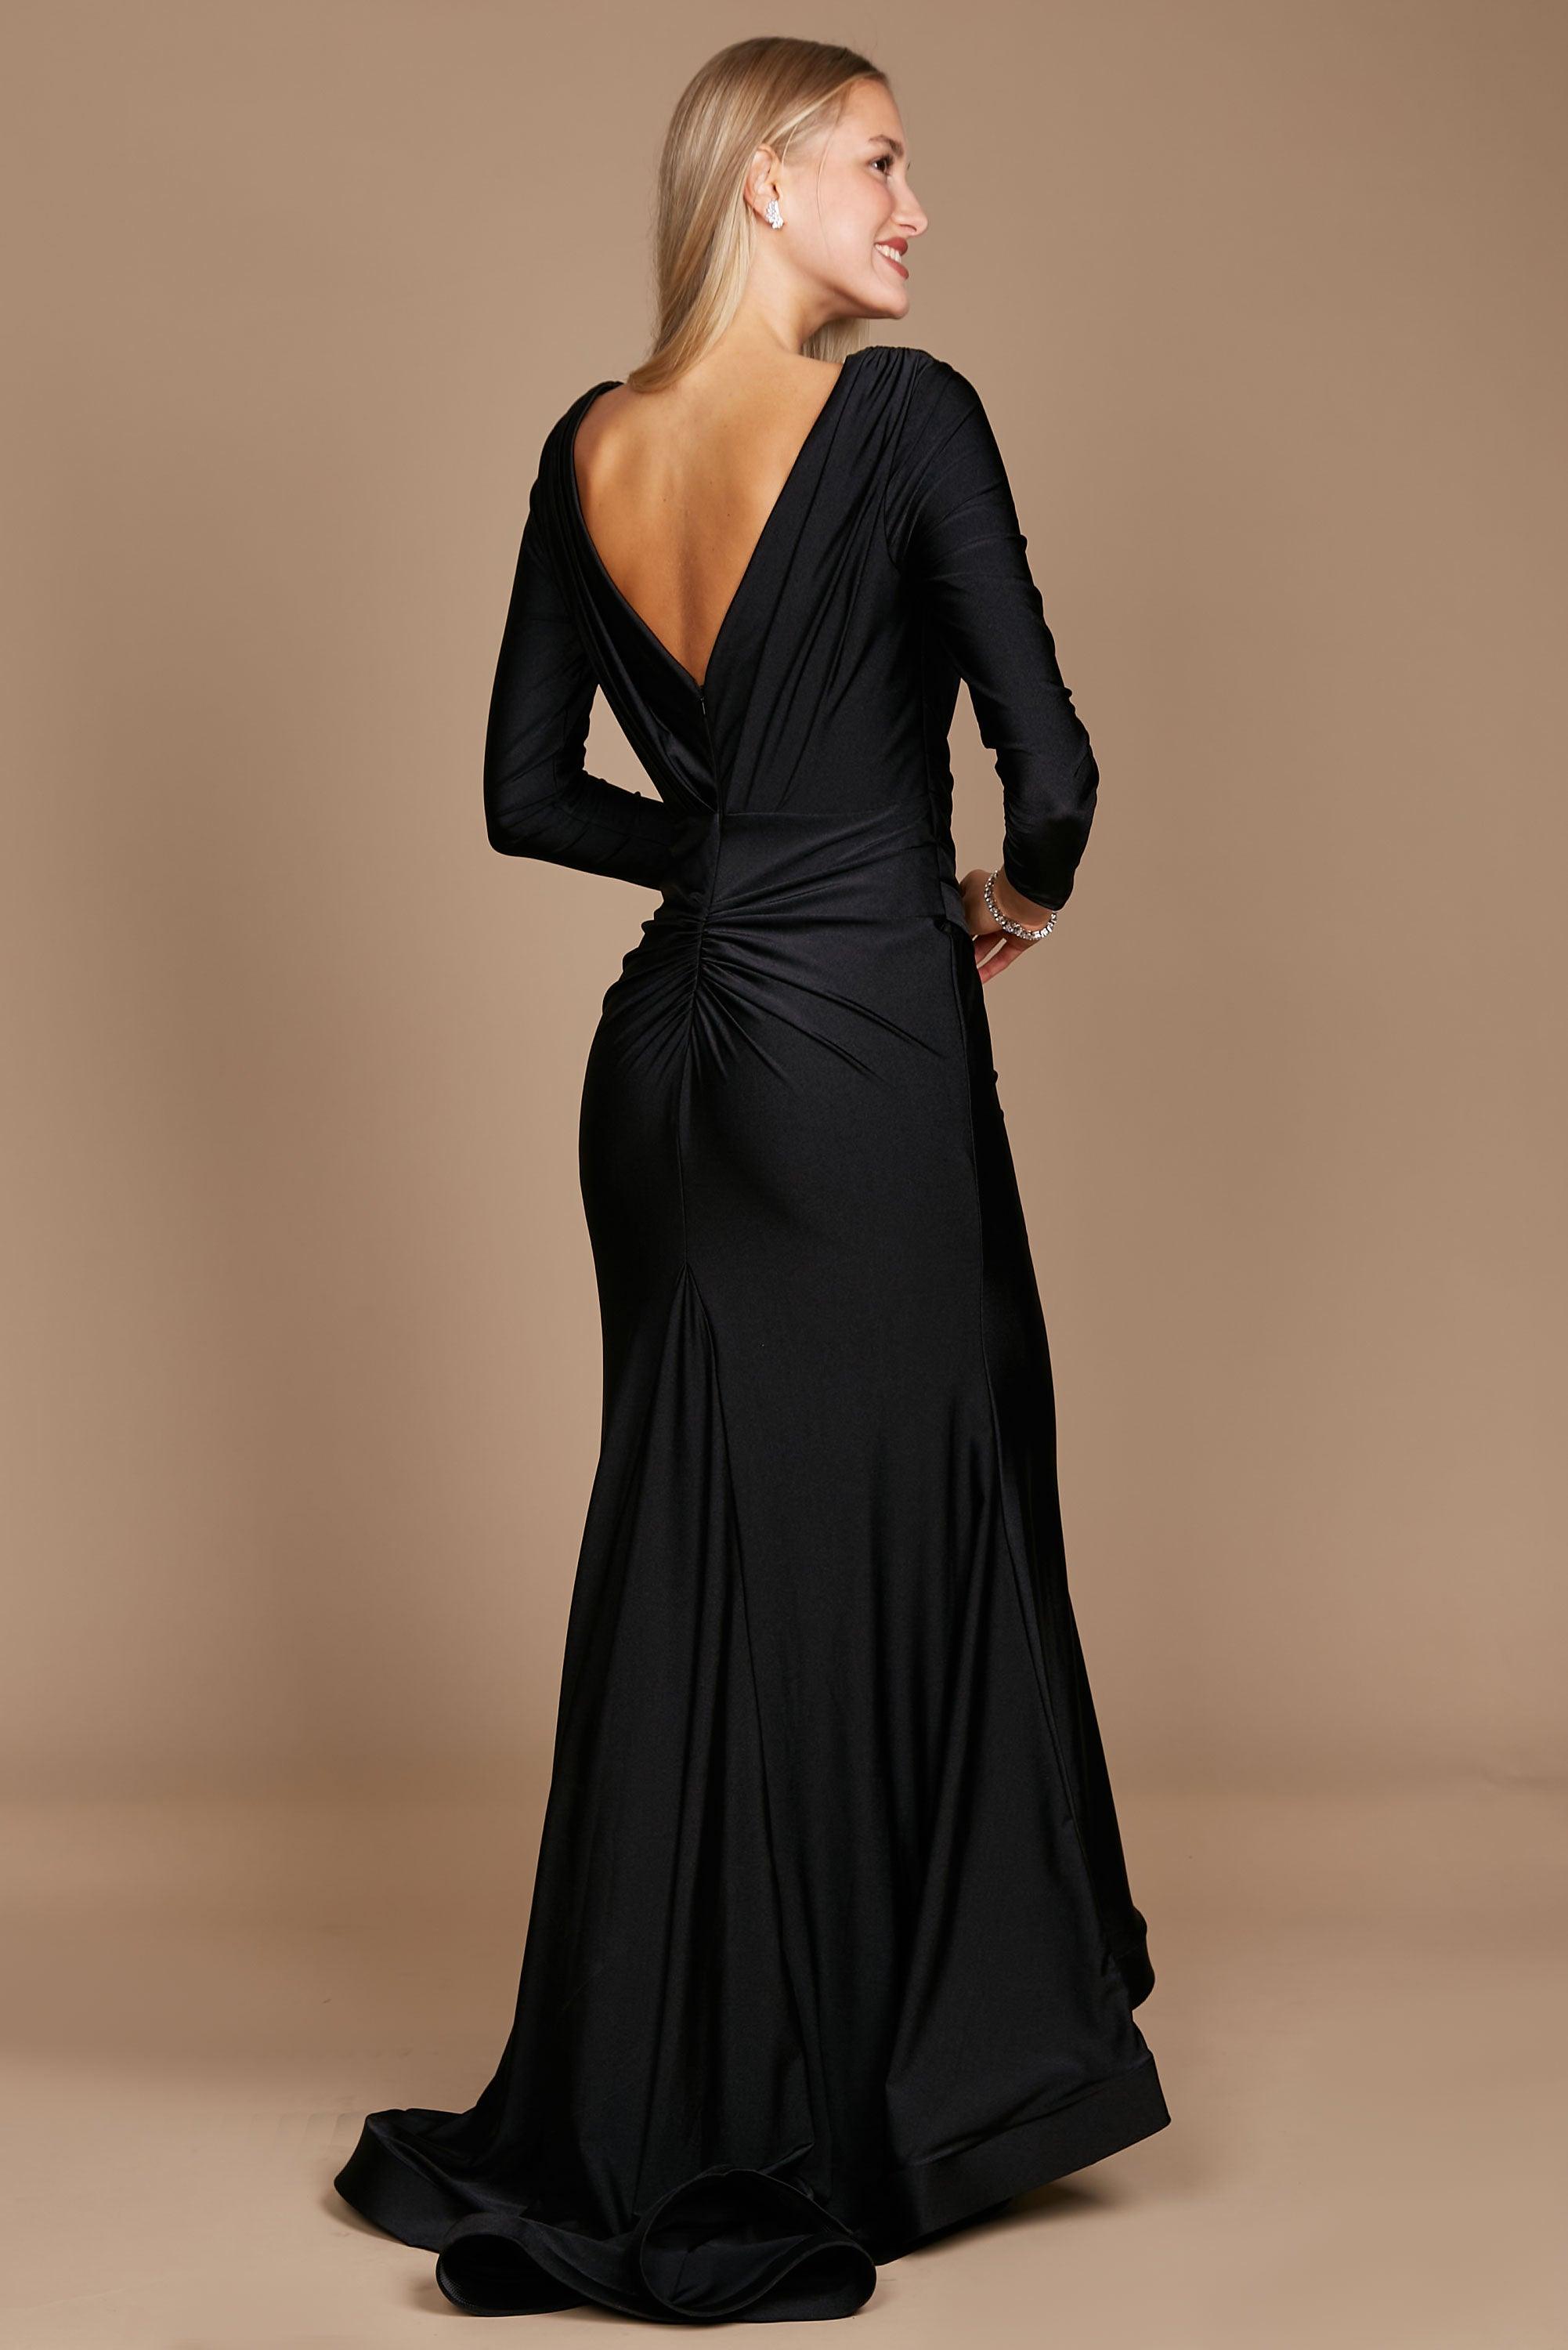 Amazon.com: LEJY Velvet Evening Gown Off The Wedding Dress With Detachable  Train 2 Black : Clothing, Shoes & Jewelry